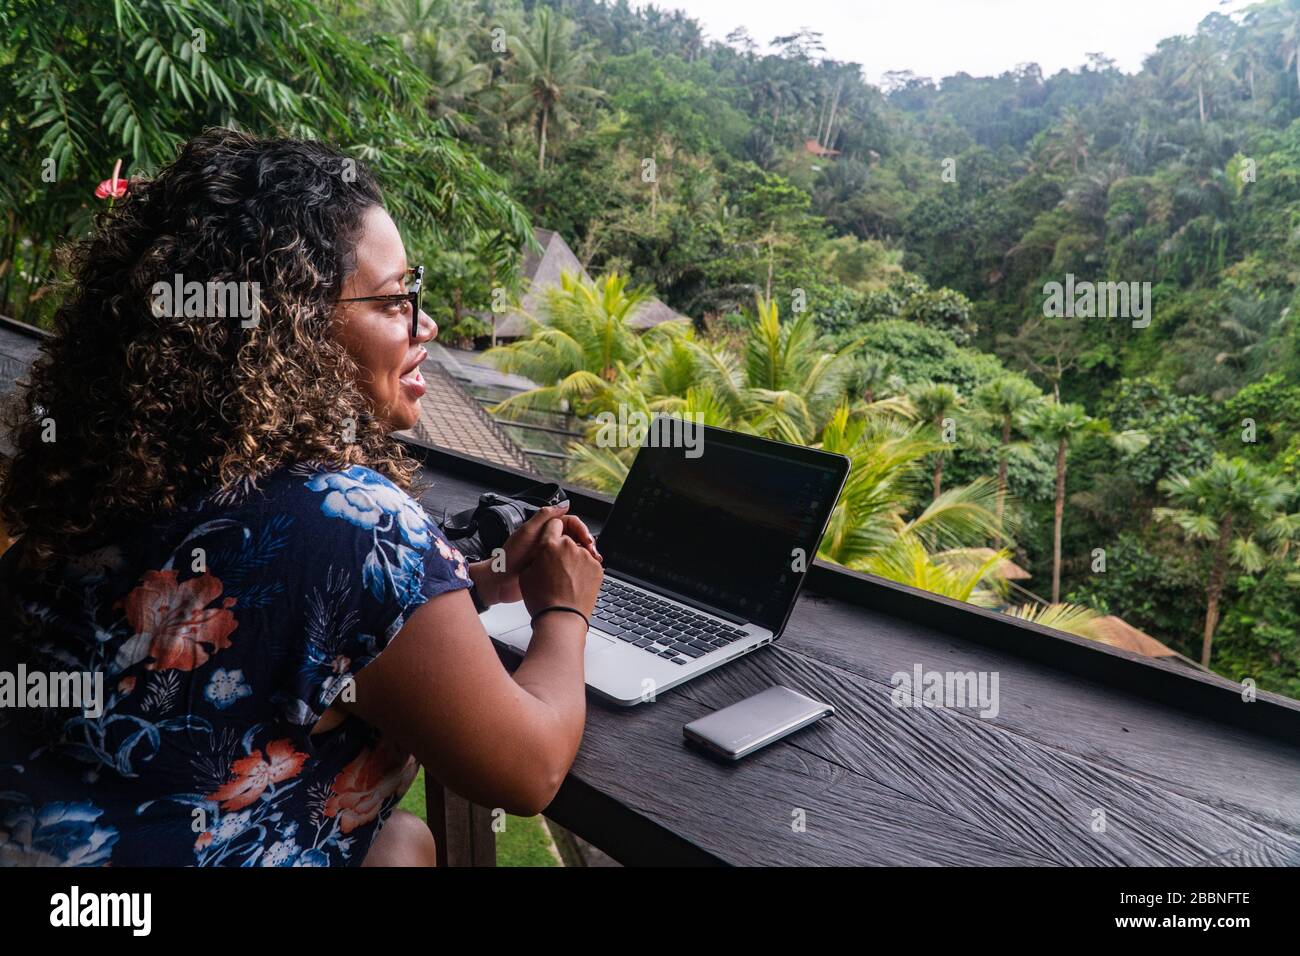 Working on laptop in an exotic location Bali Indonesia Stock Photo